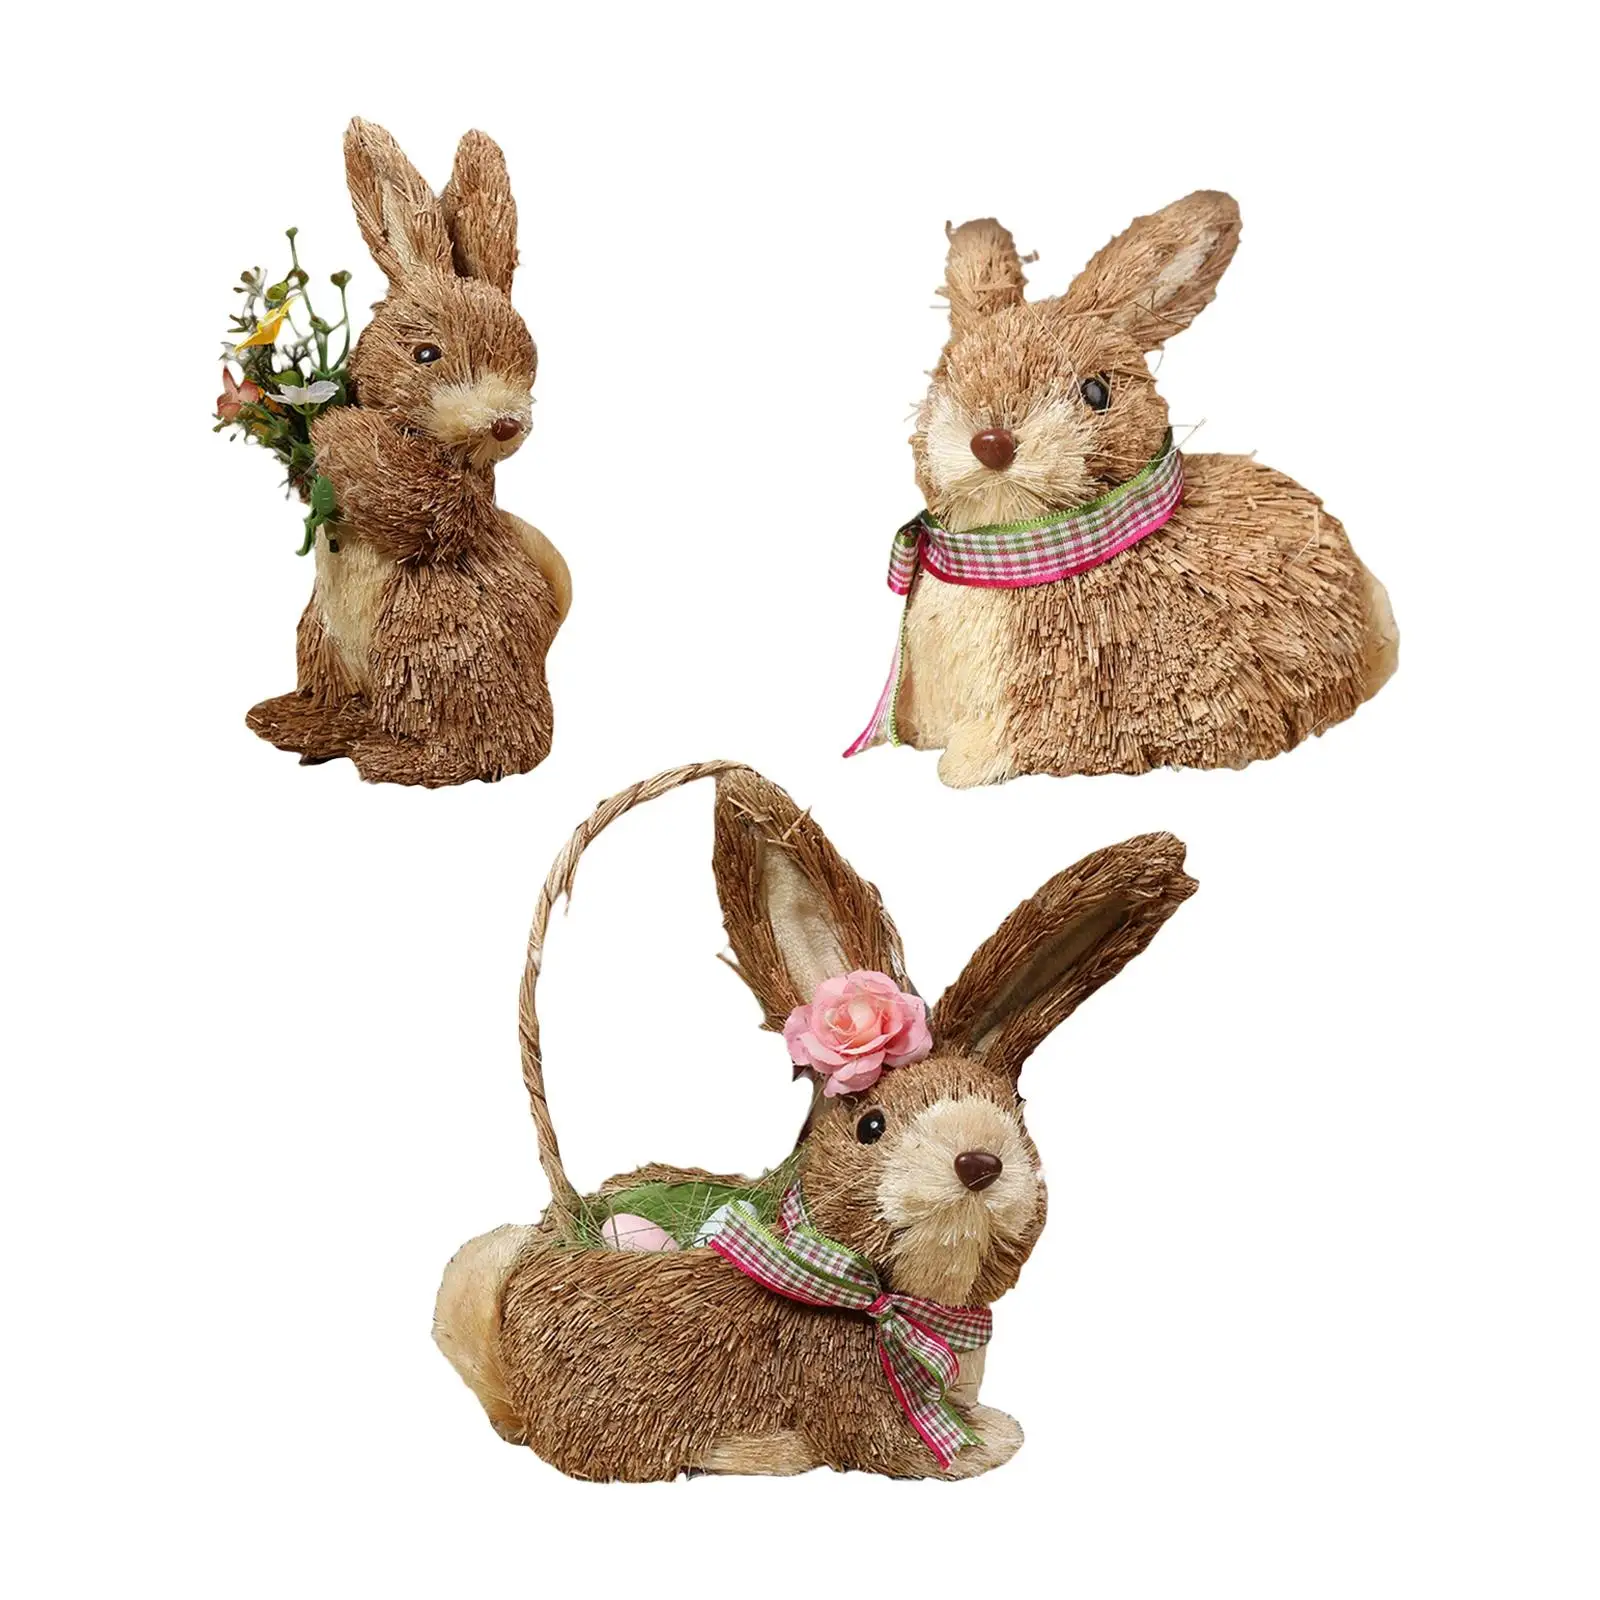 3x Cute Easter Straw Rabbit Crafts Figure Ornament for  Decor